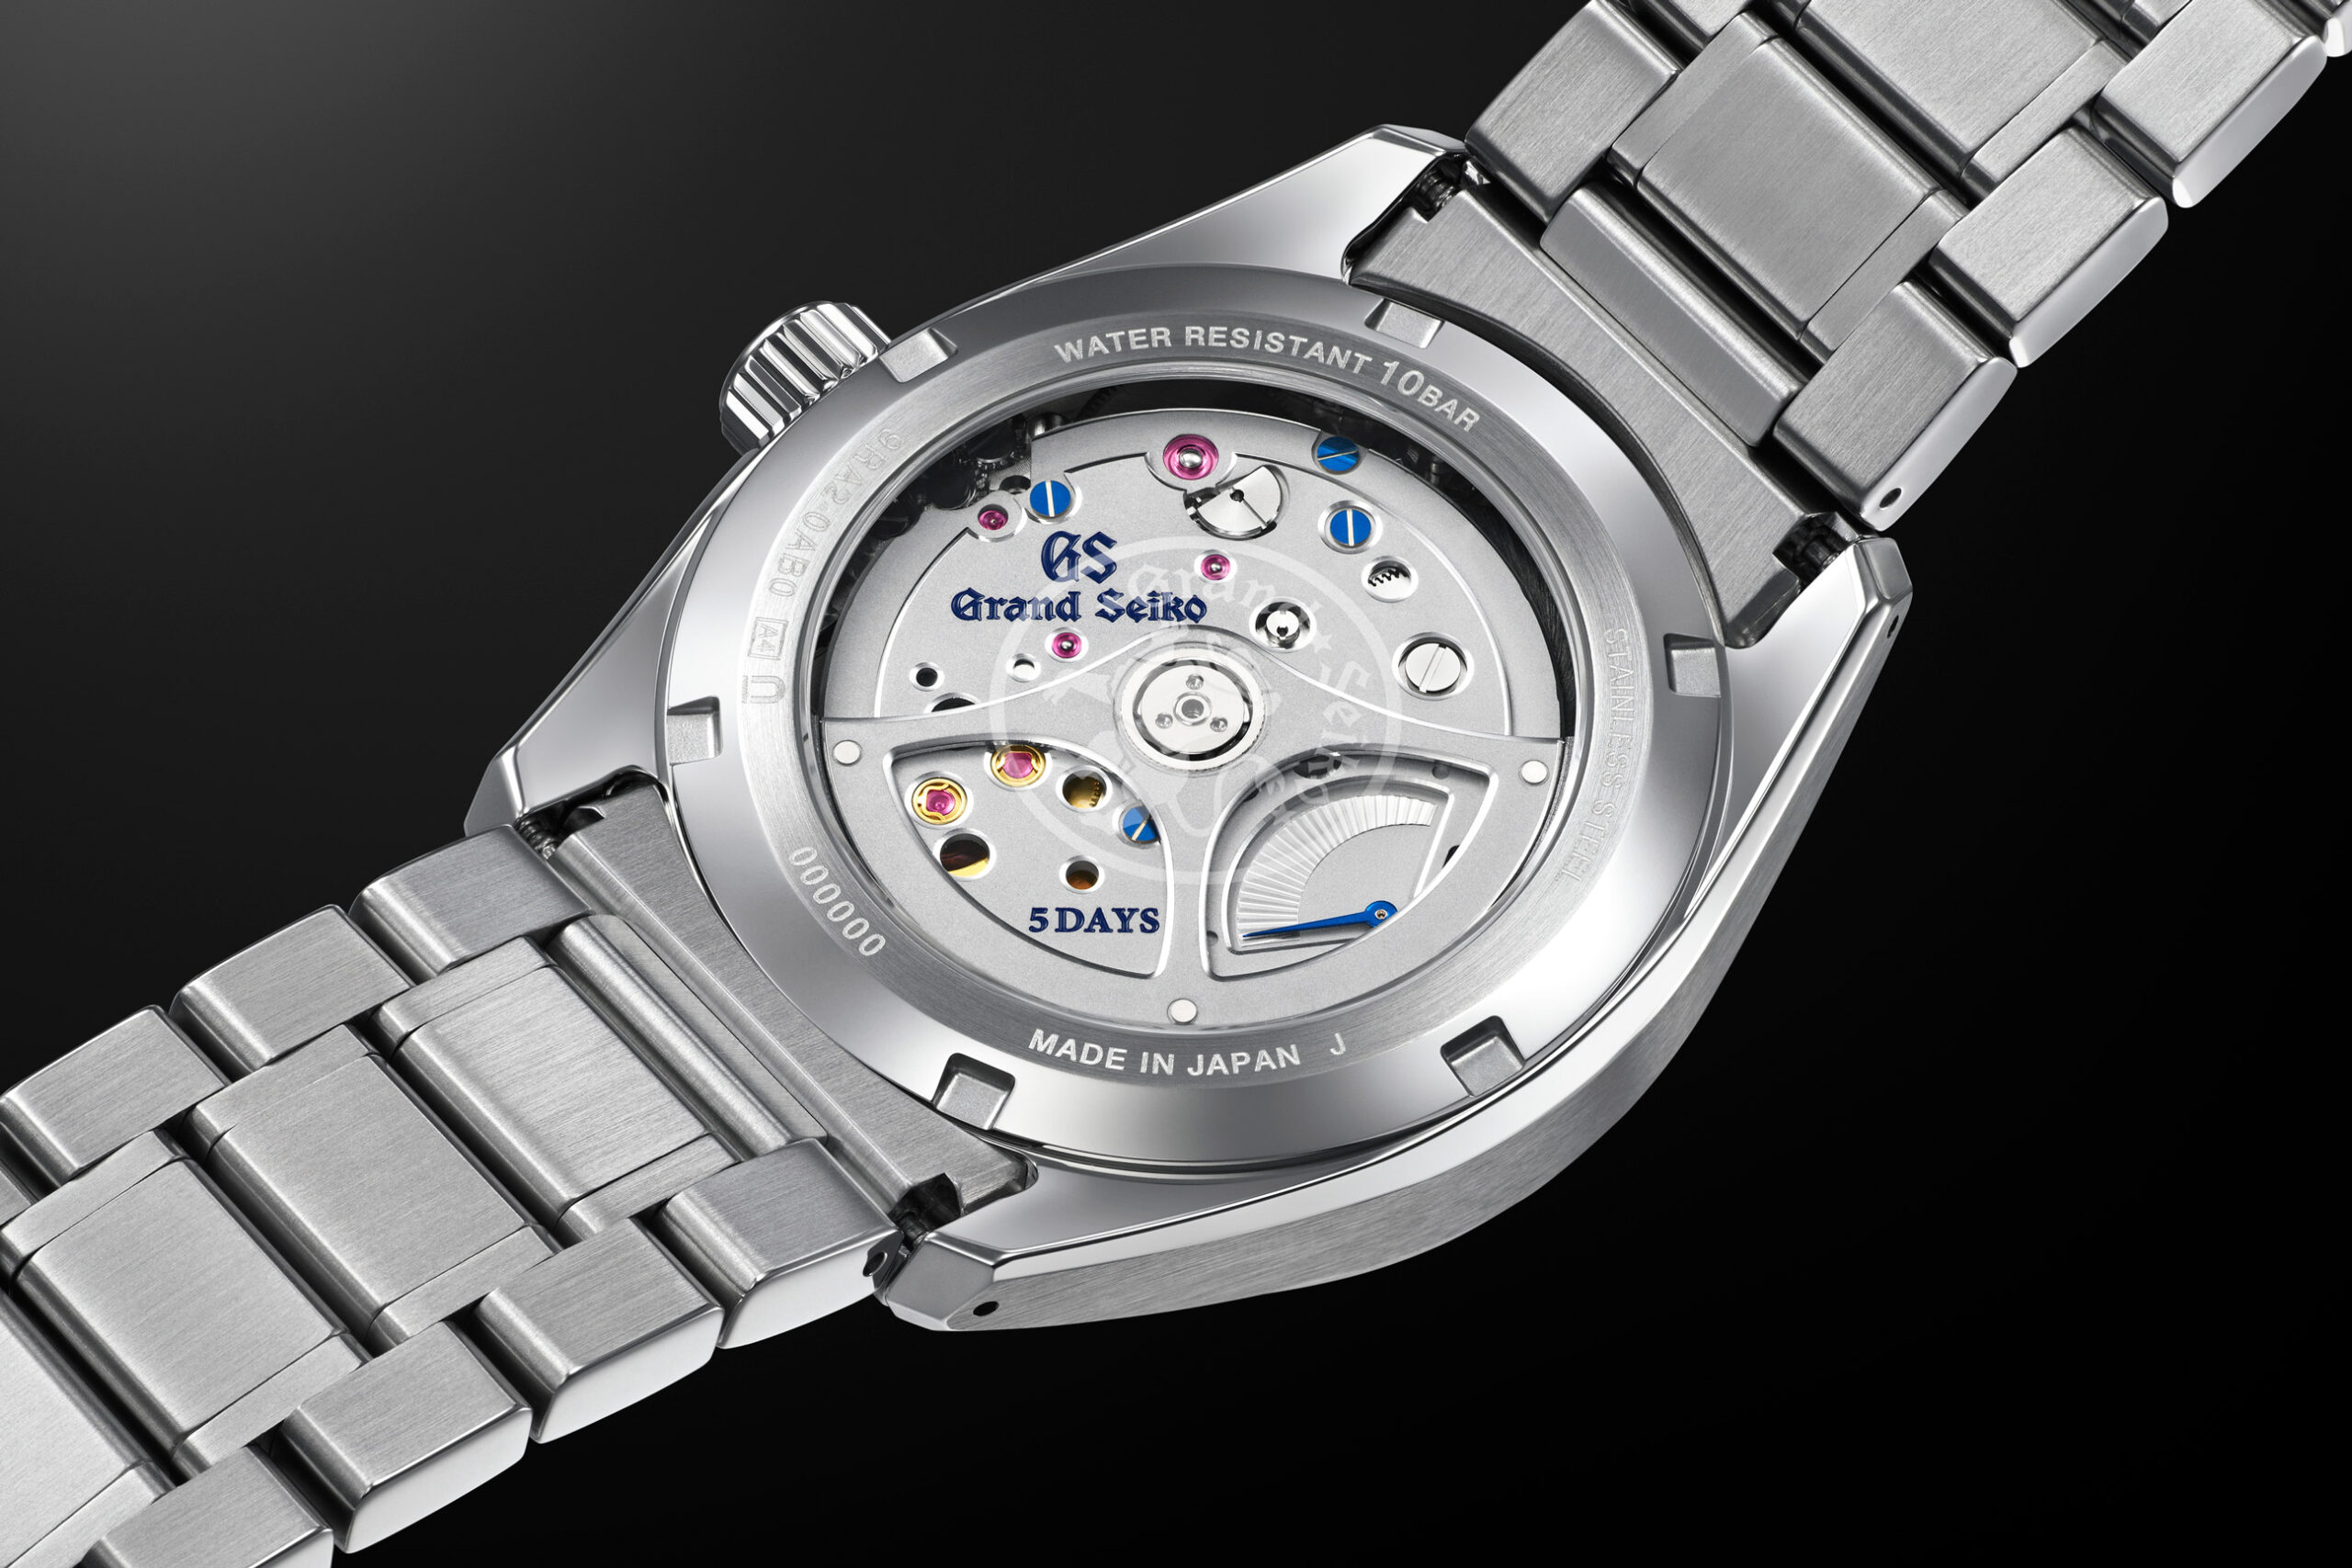 Photograph showing the Spring Drive calibre 9RA2 with its 5 day power reserve indicator located in the Grand Seiko SLGA013